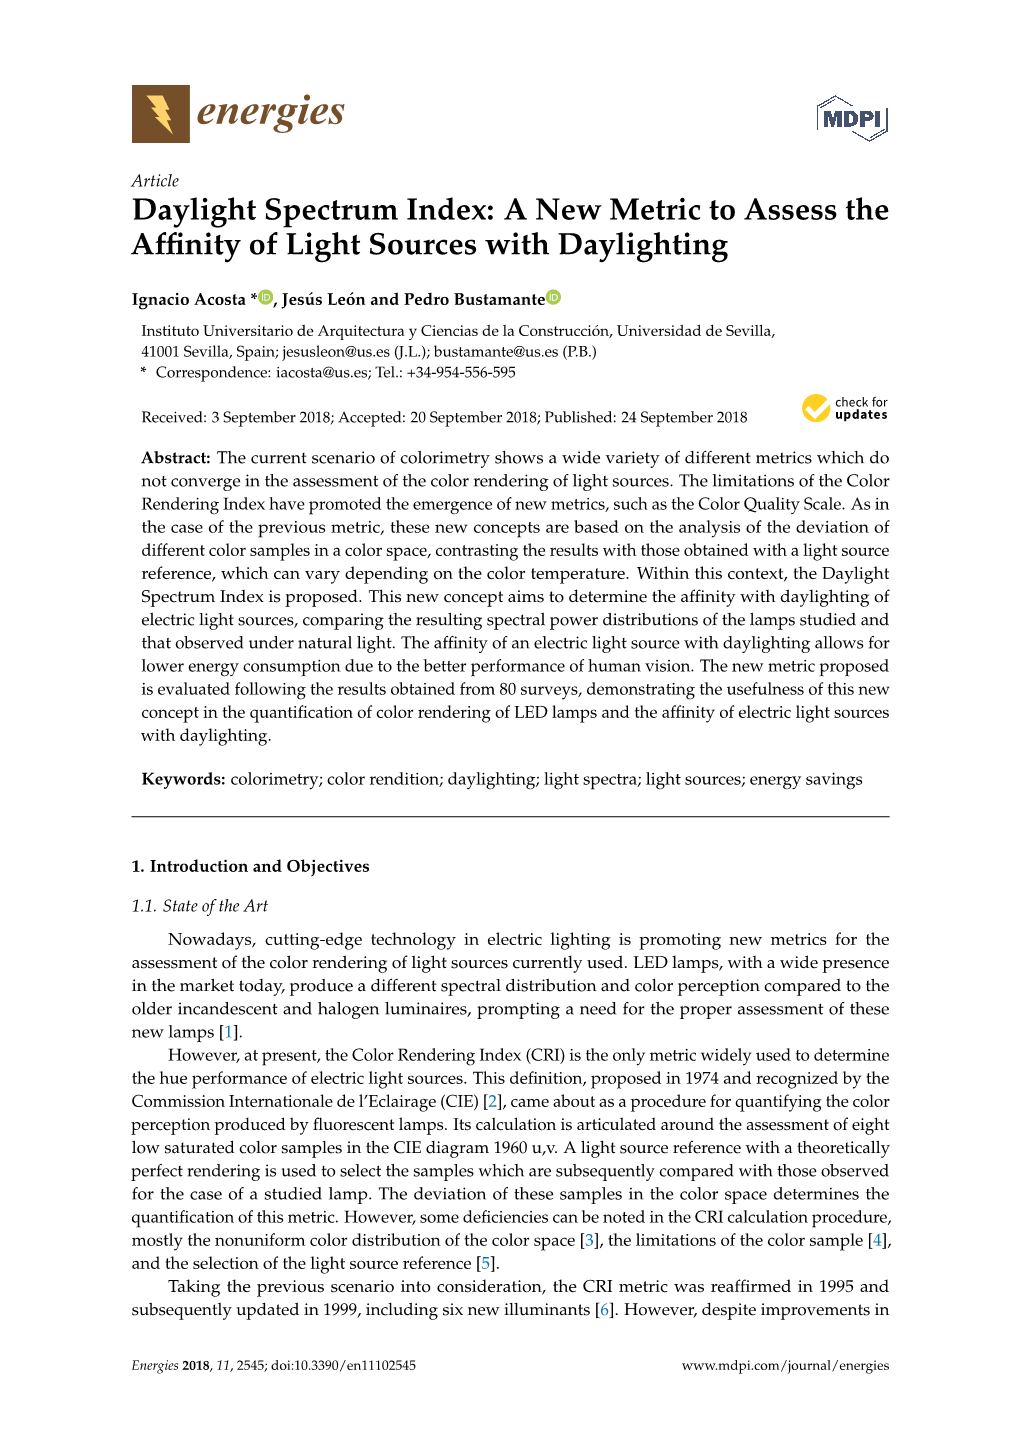 Daylight Spectrum Index: a New Metric to Assess the Affinity of Light Sources with Daylighting